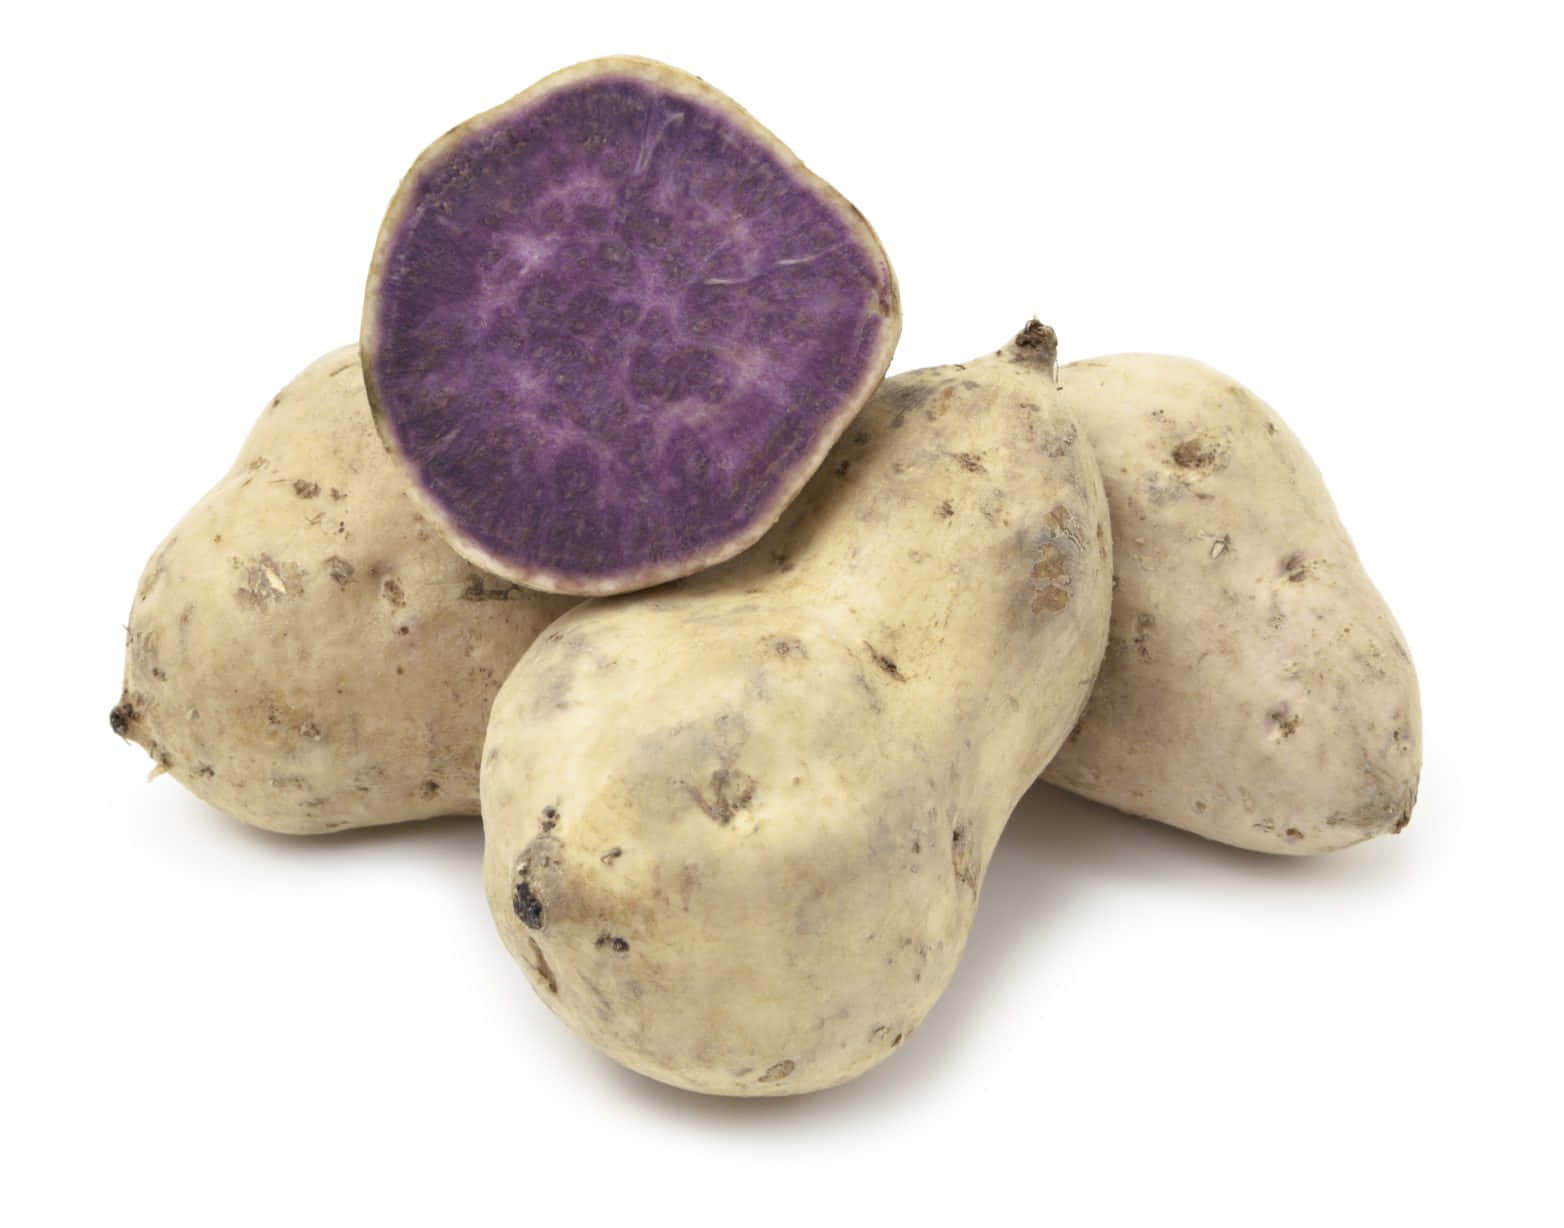 Tasty Purple Potatoes for Every Occasion Wallpaper